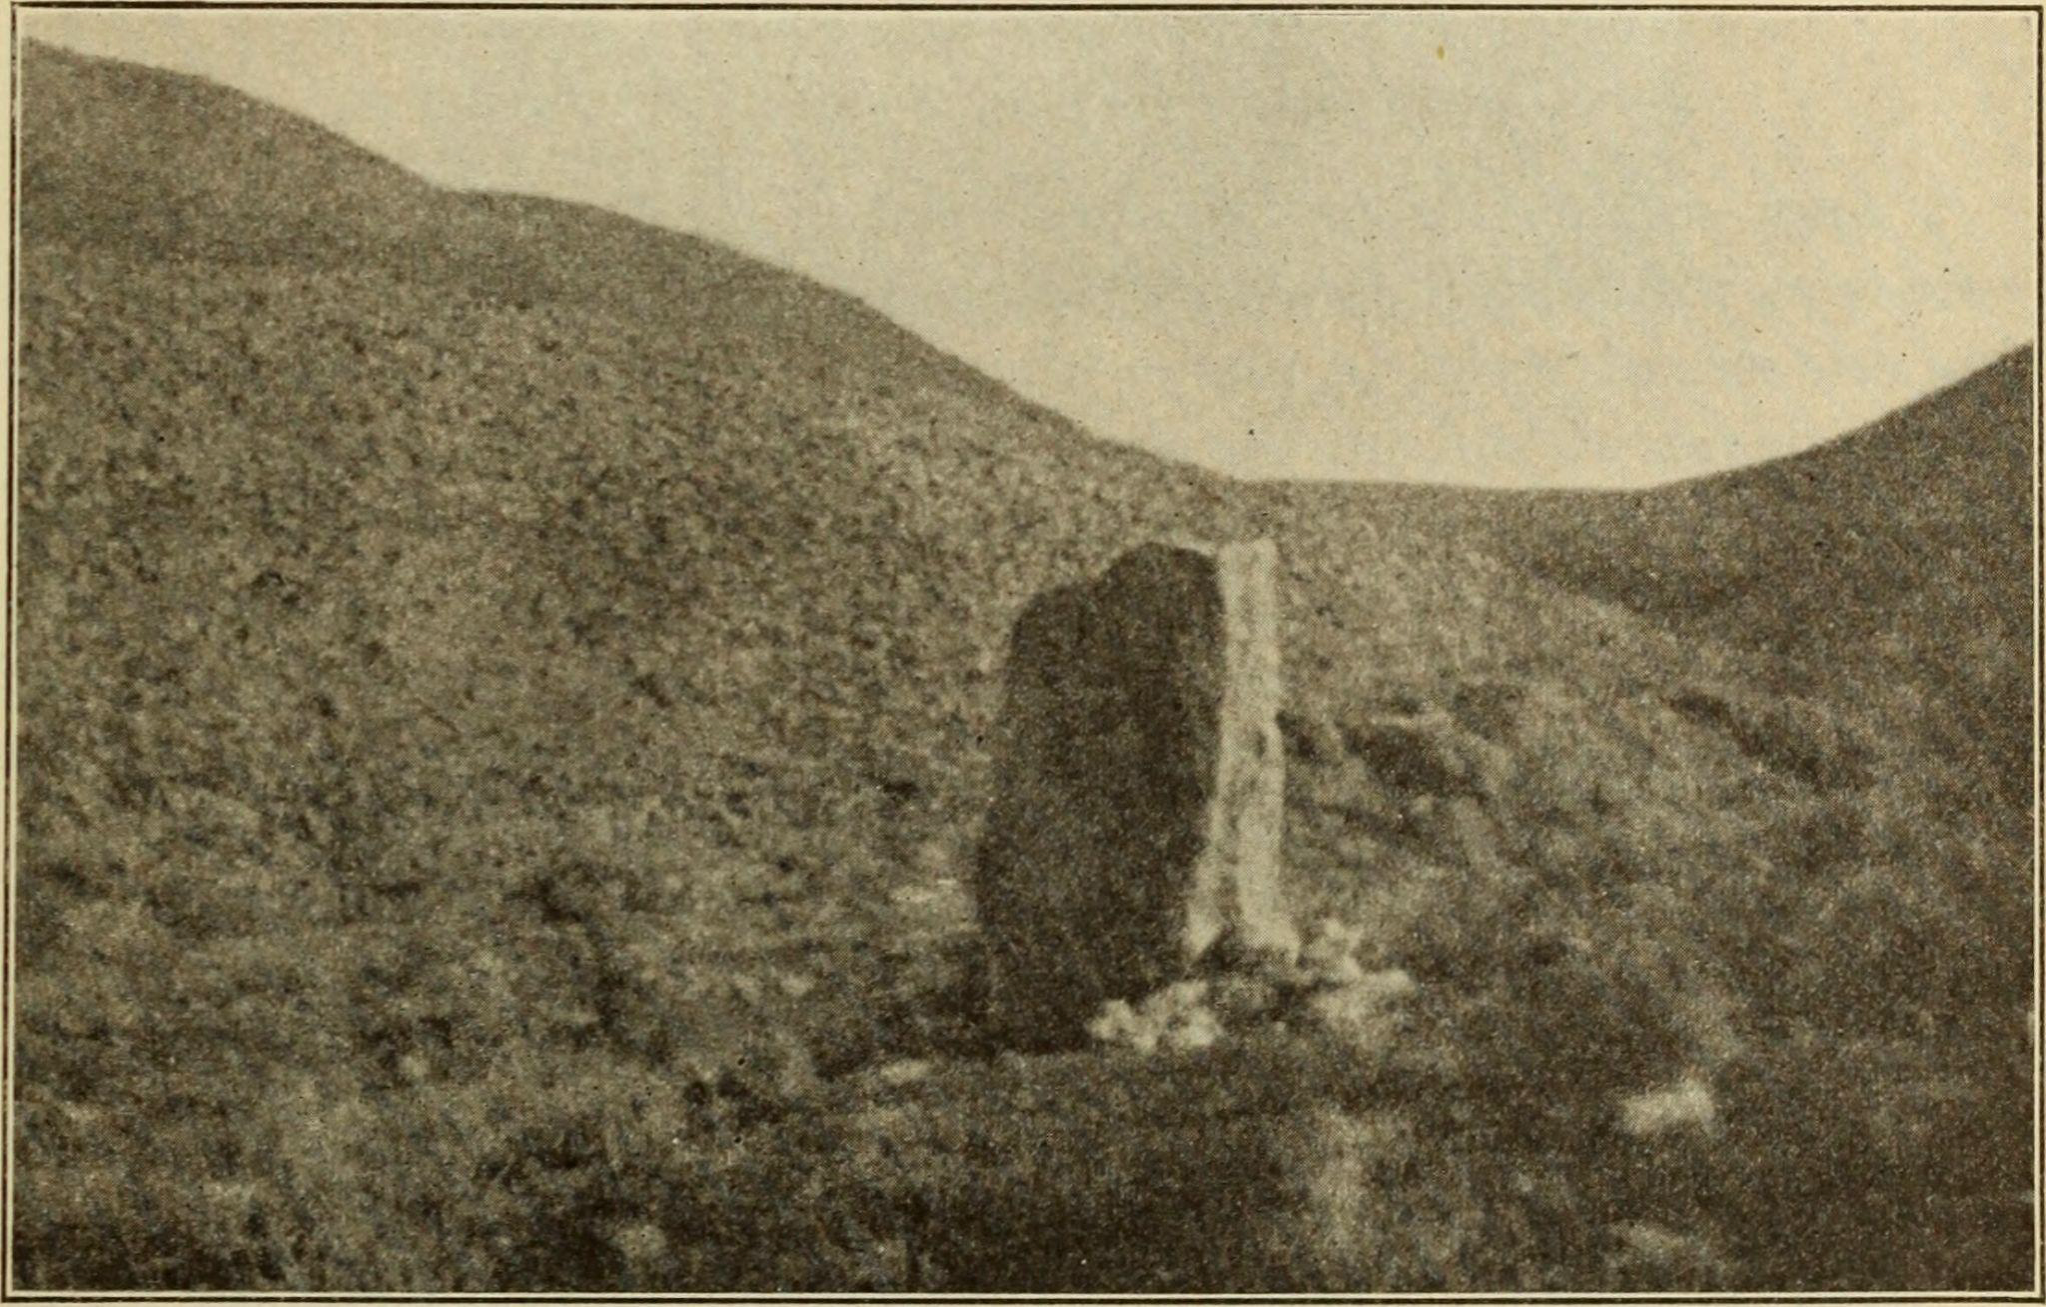 A grainy sepia photograph of rolling hills, foregrounded by a large upright rock.